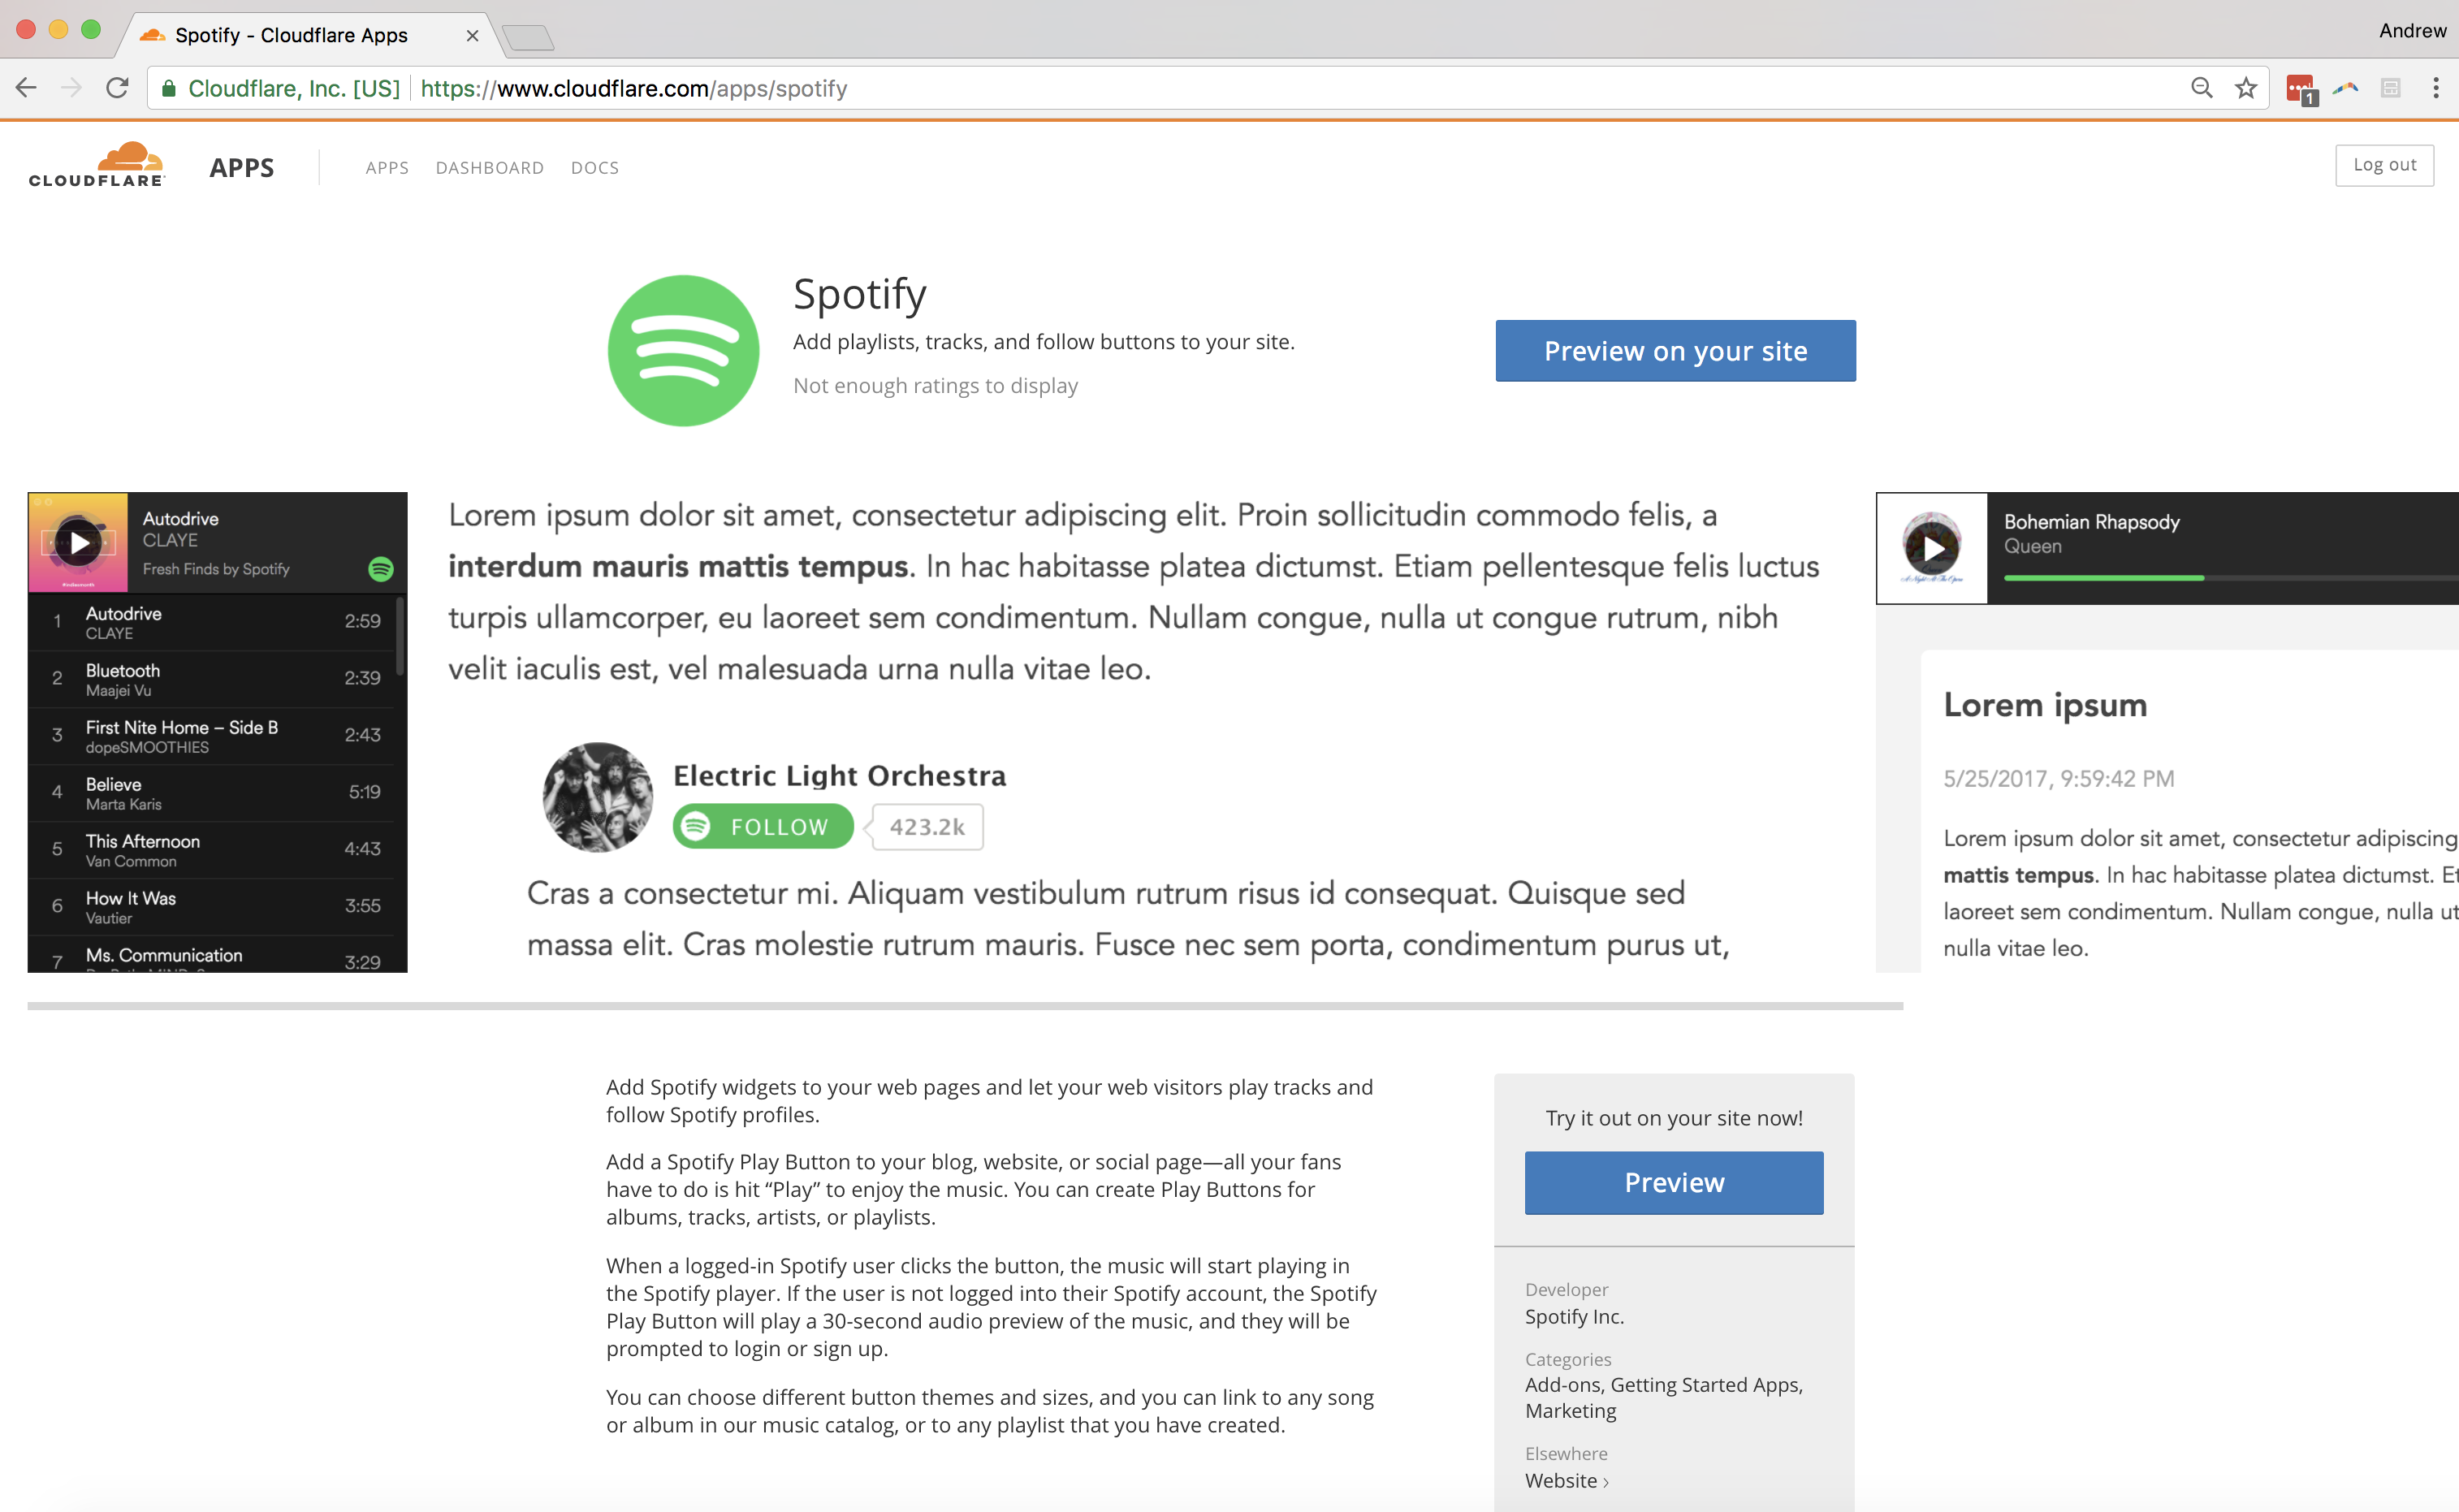 Spotify's Cloudflare App is open source: fork it for your next project